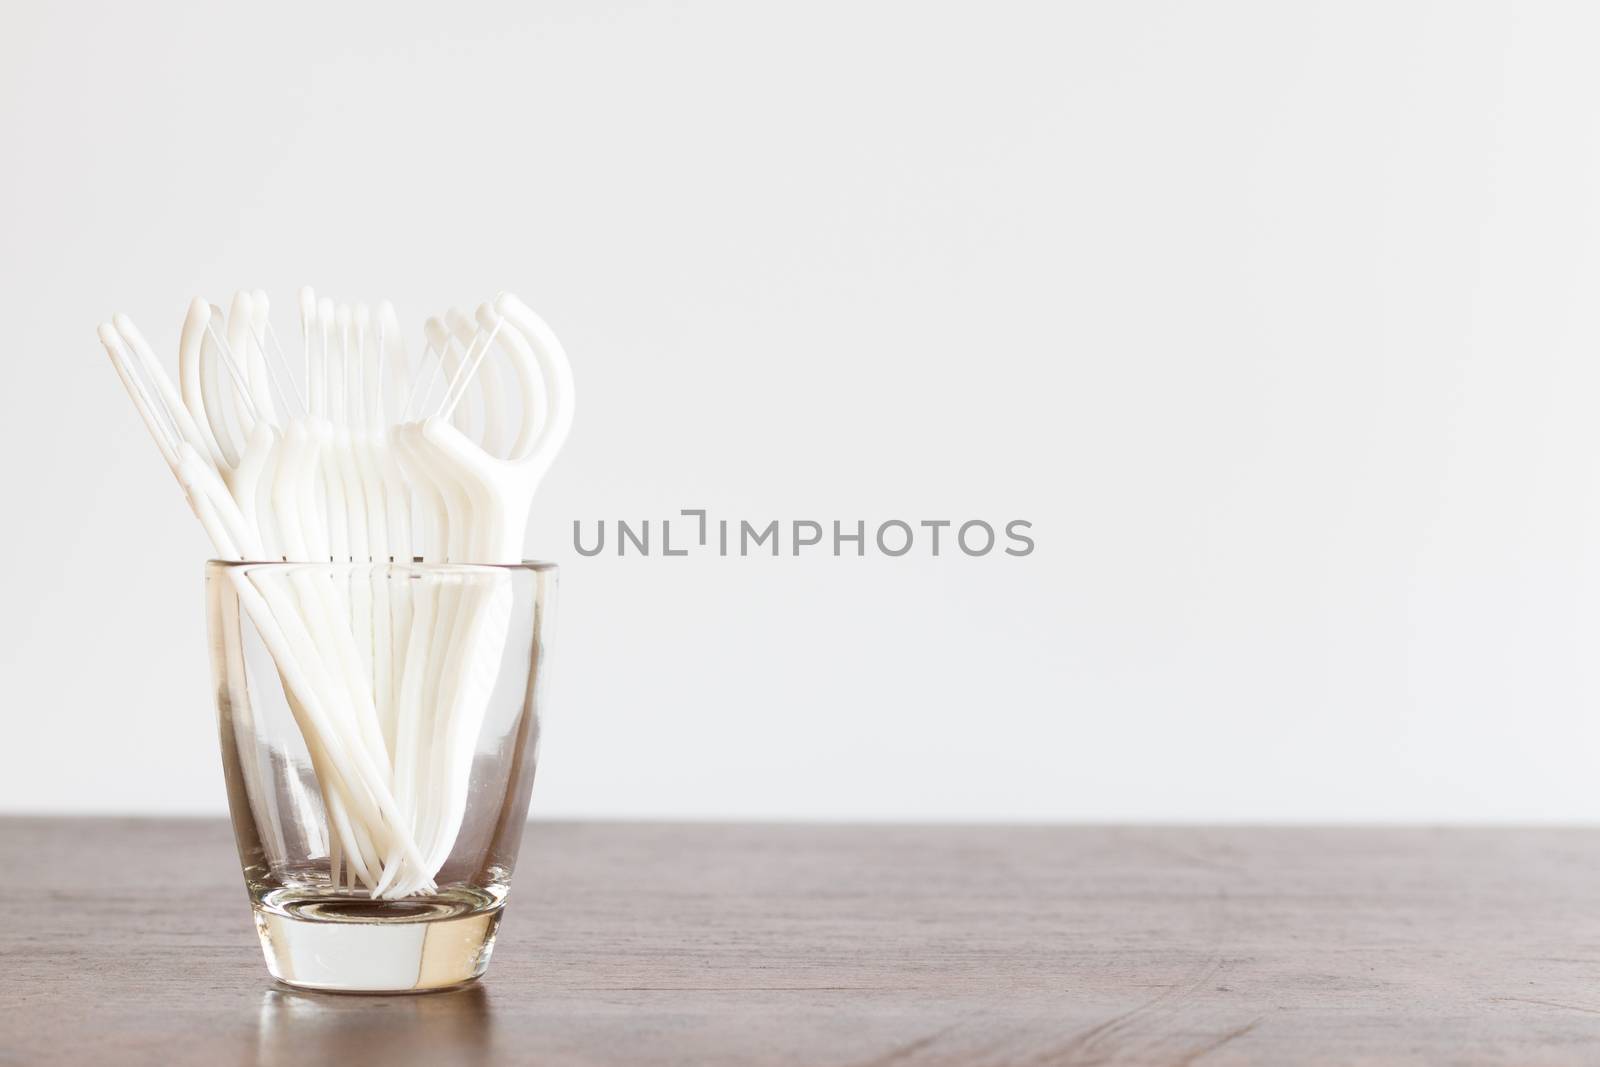 Oral Device : Dental floss in glass on wooden background